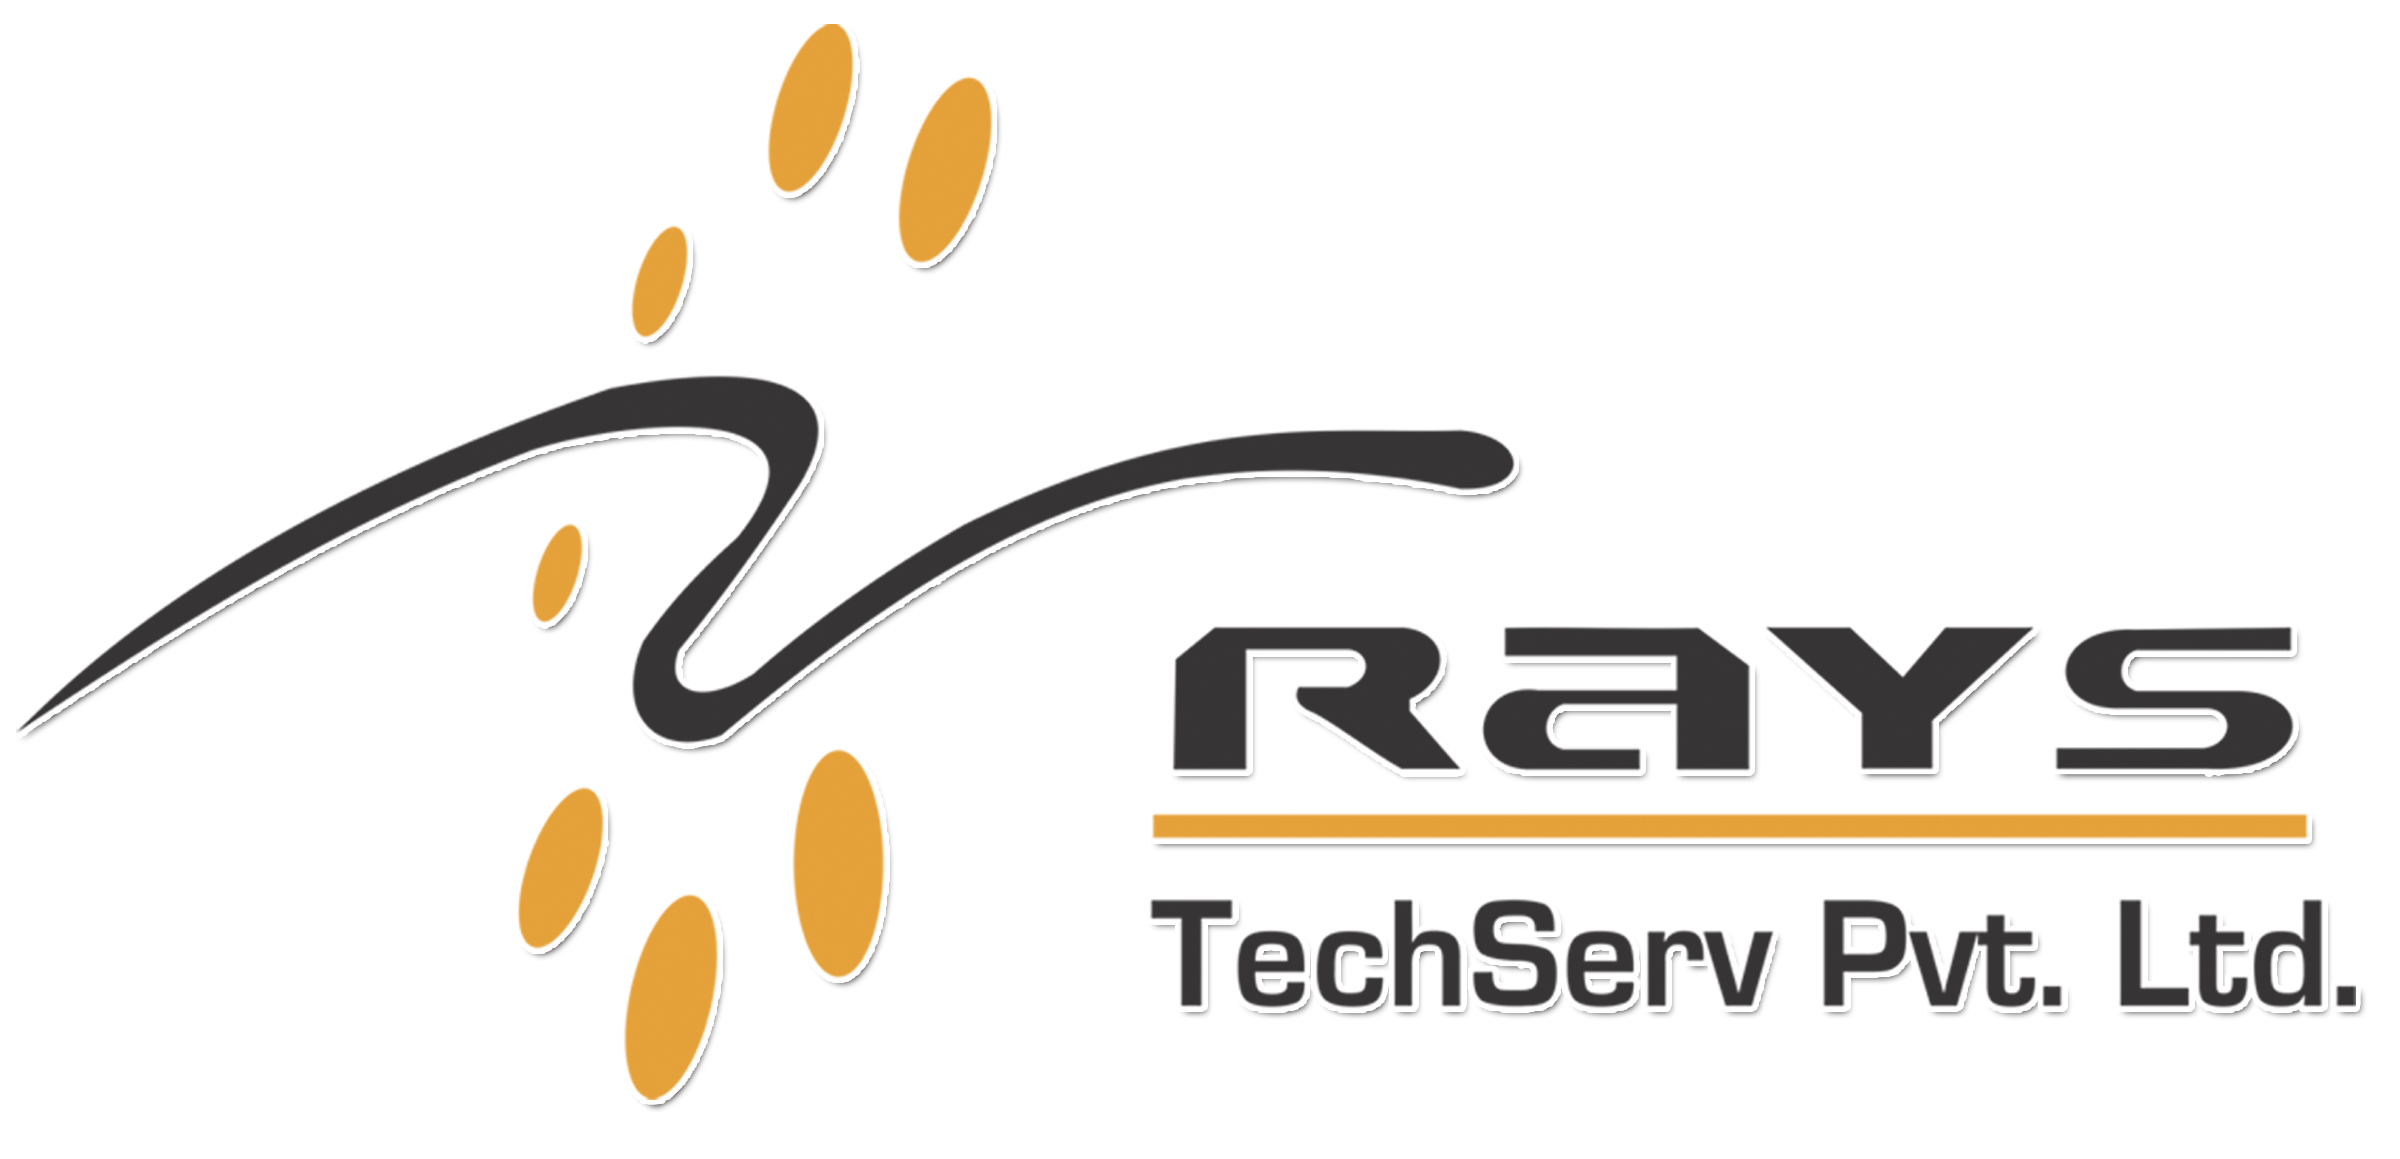 Rays TechServ Pvt Ltd profile on Qualified.One